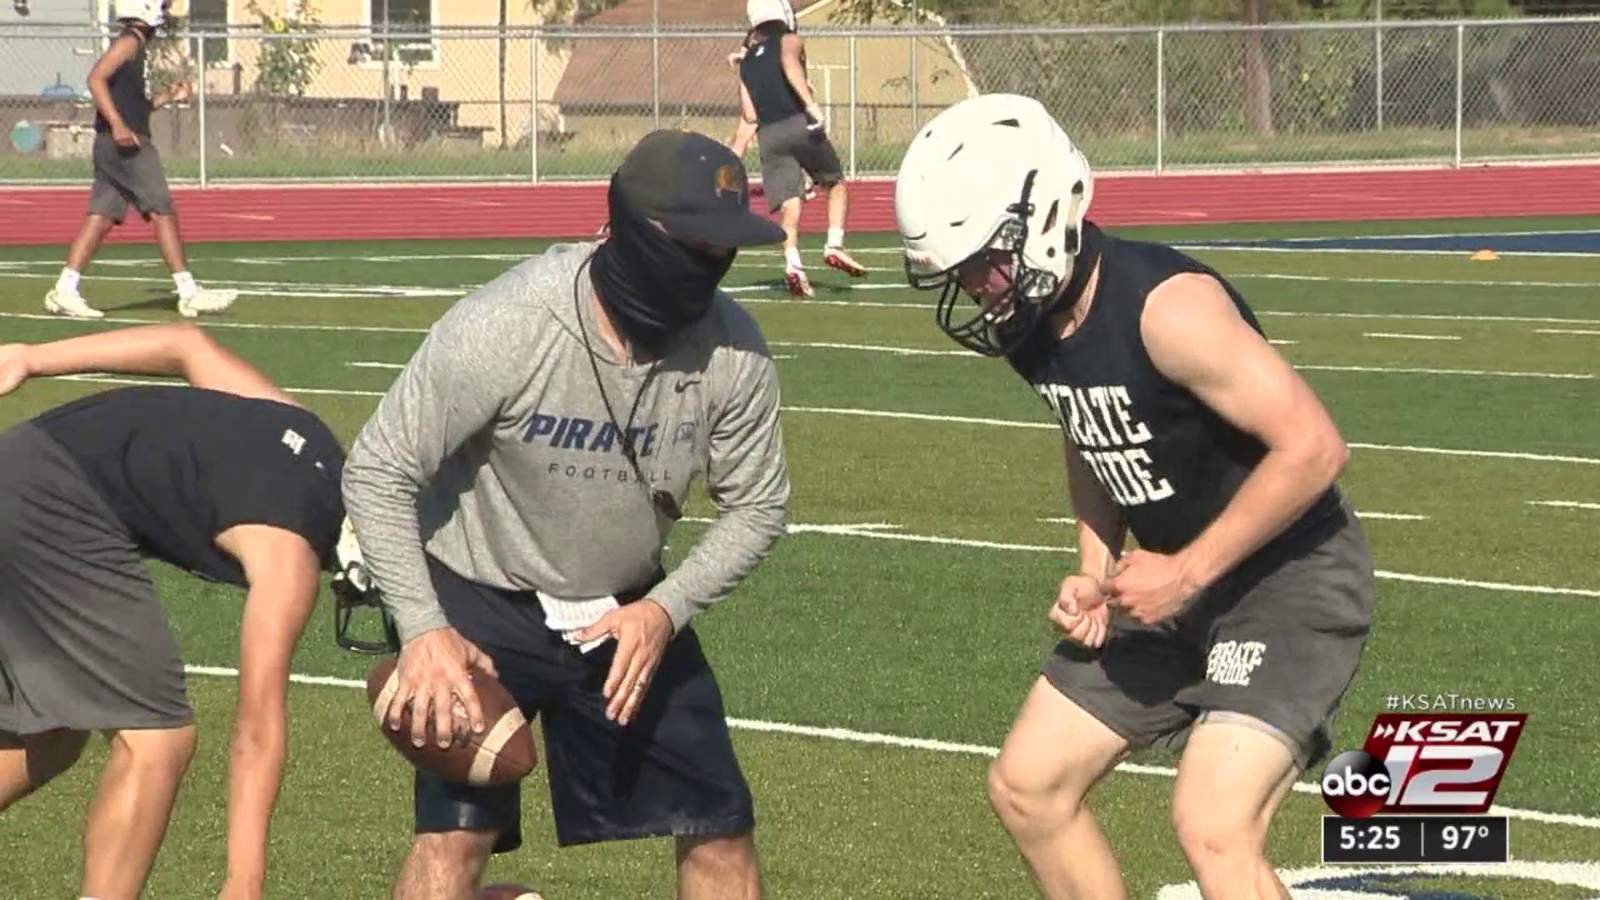 Poth football excited to return to practice, hopeful to complete season